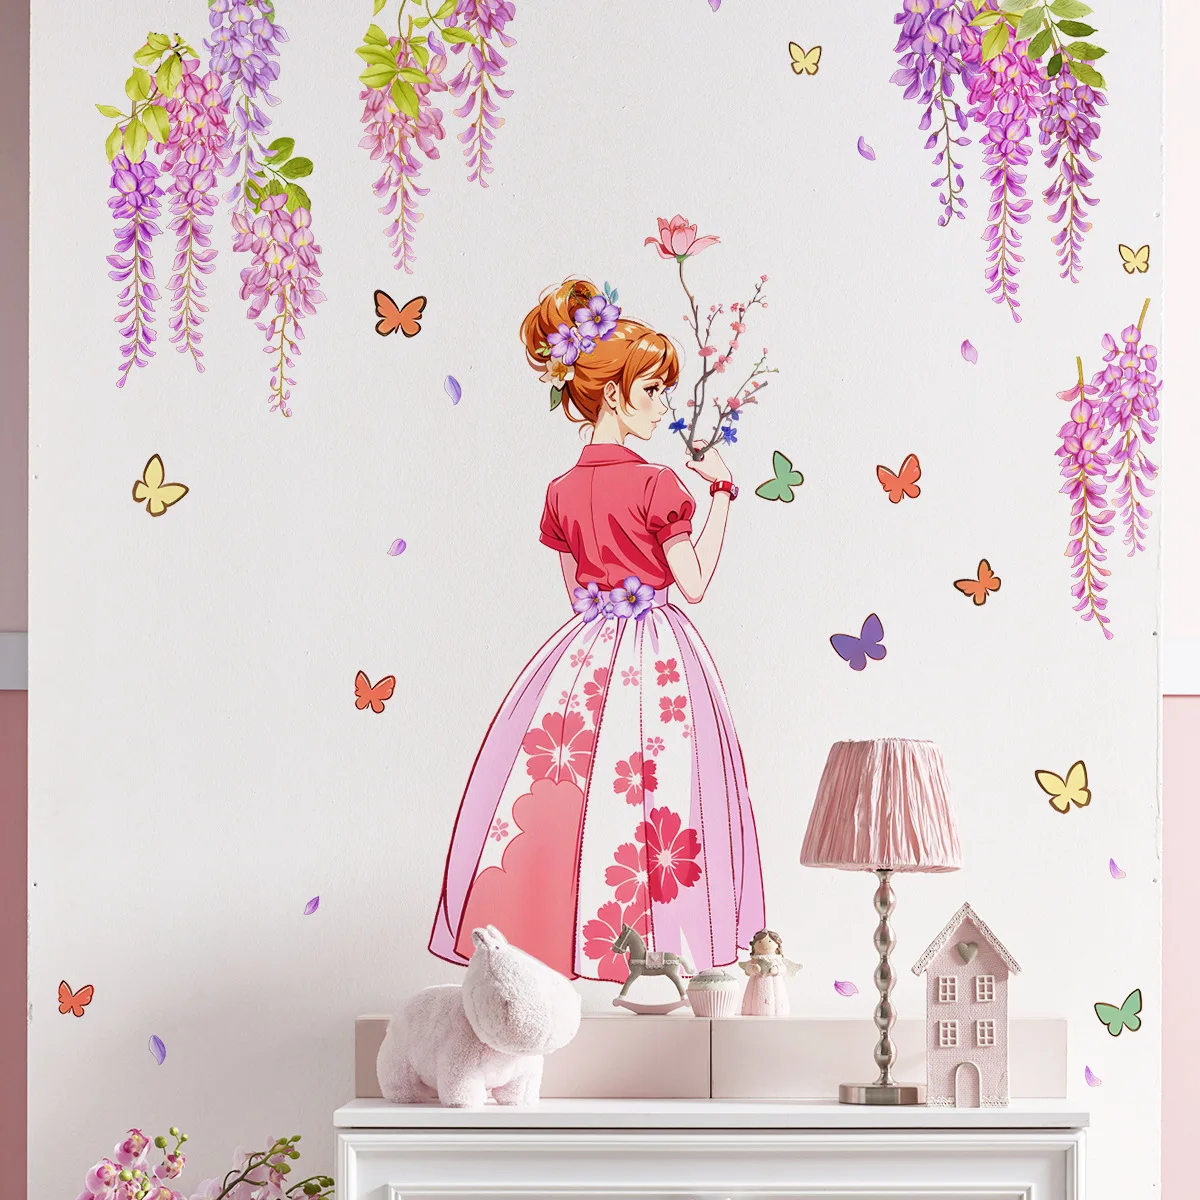 2pcs Plant Vine Girl Butterfly Wall Stickers Living Room Bedroom Background Wall Home Decorative Wall Stickers Wallpaper Ms3032 baby boy girl colorful star wallpaper childs bedroom decor self adhesive pvc furniture wallpapers kids mural cartoon stars обои